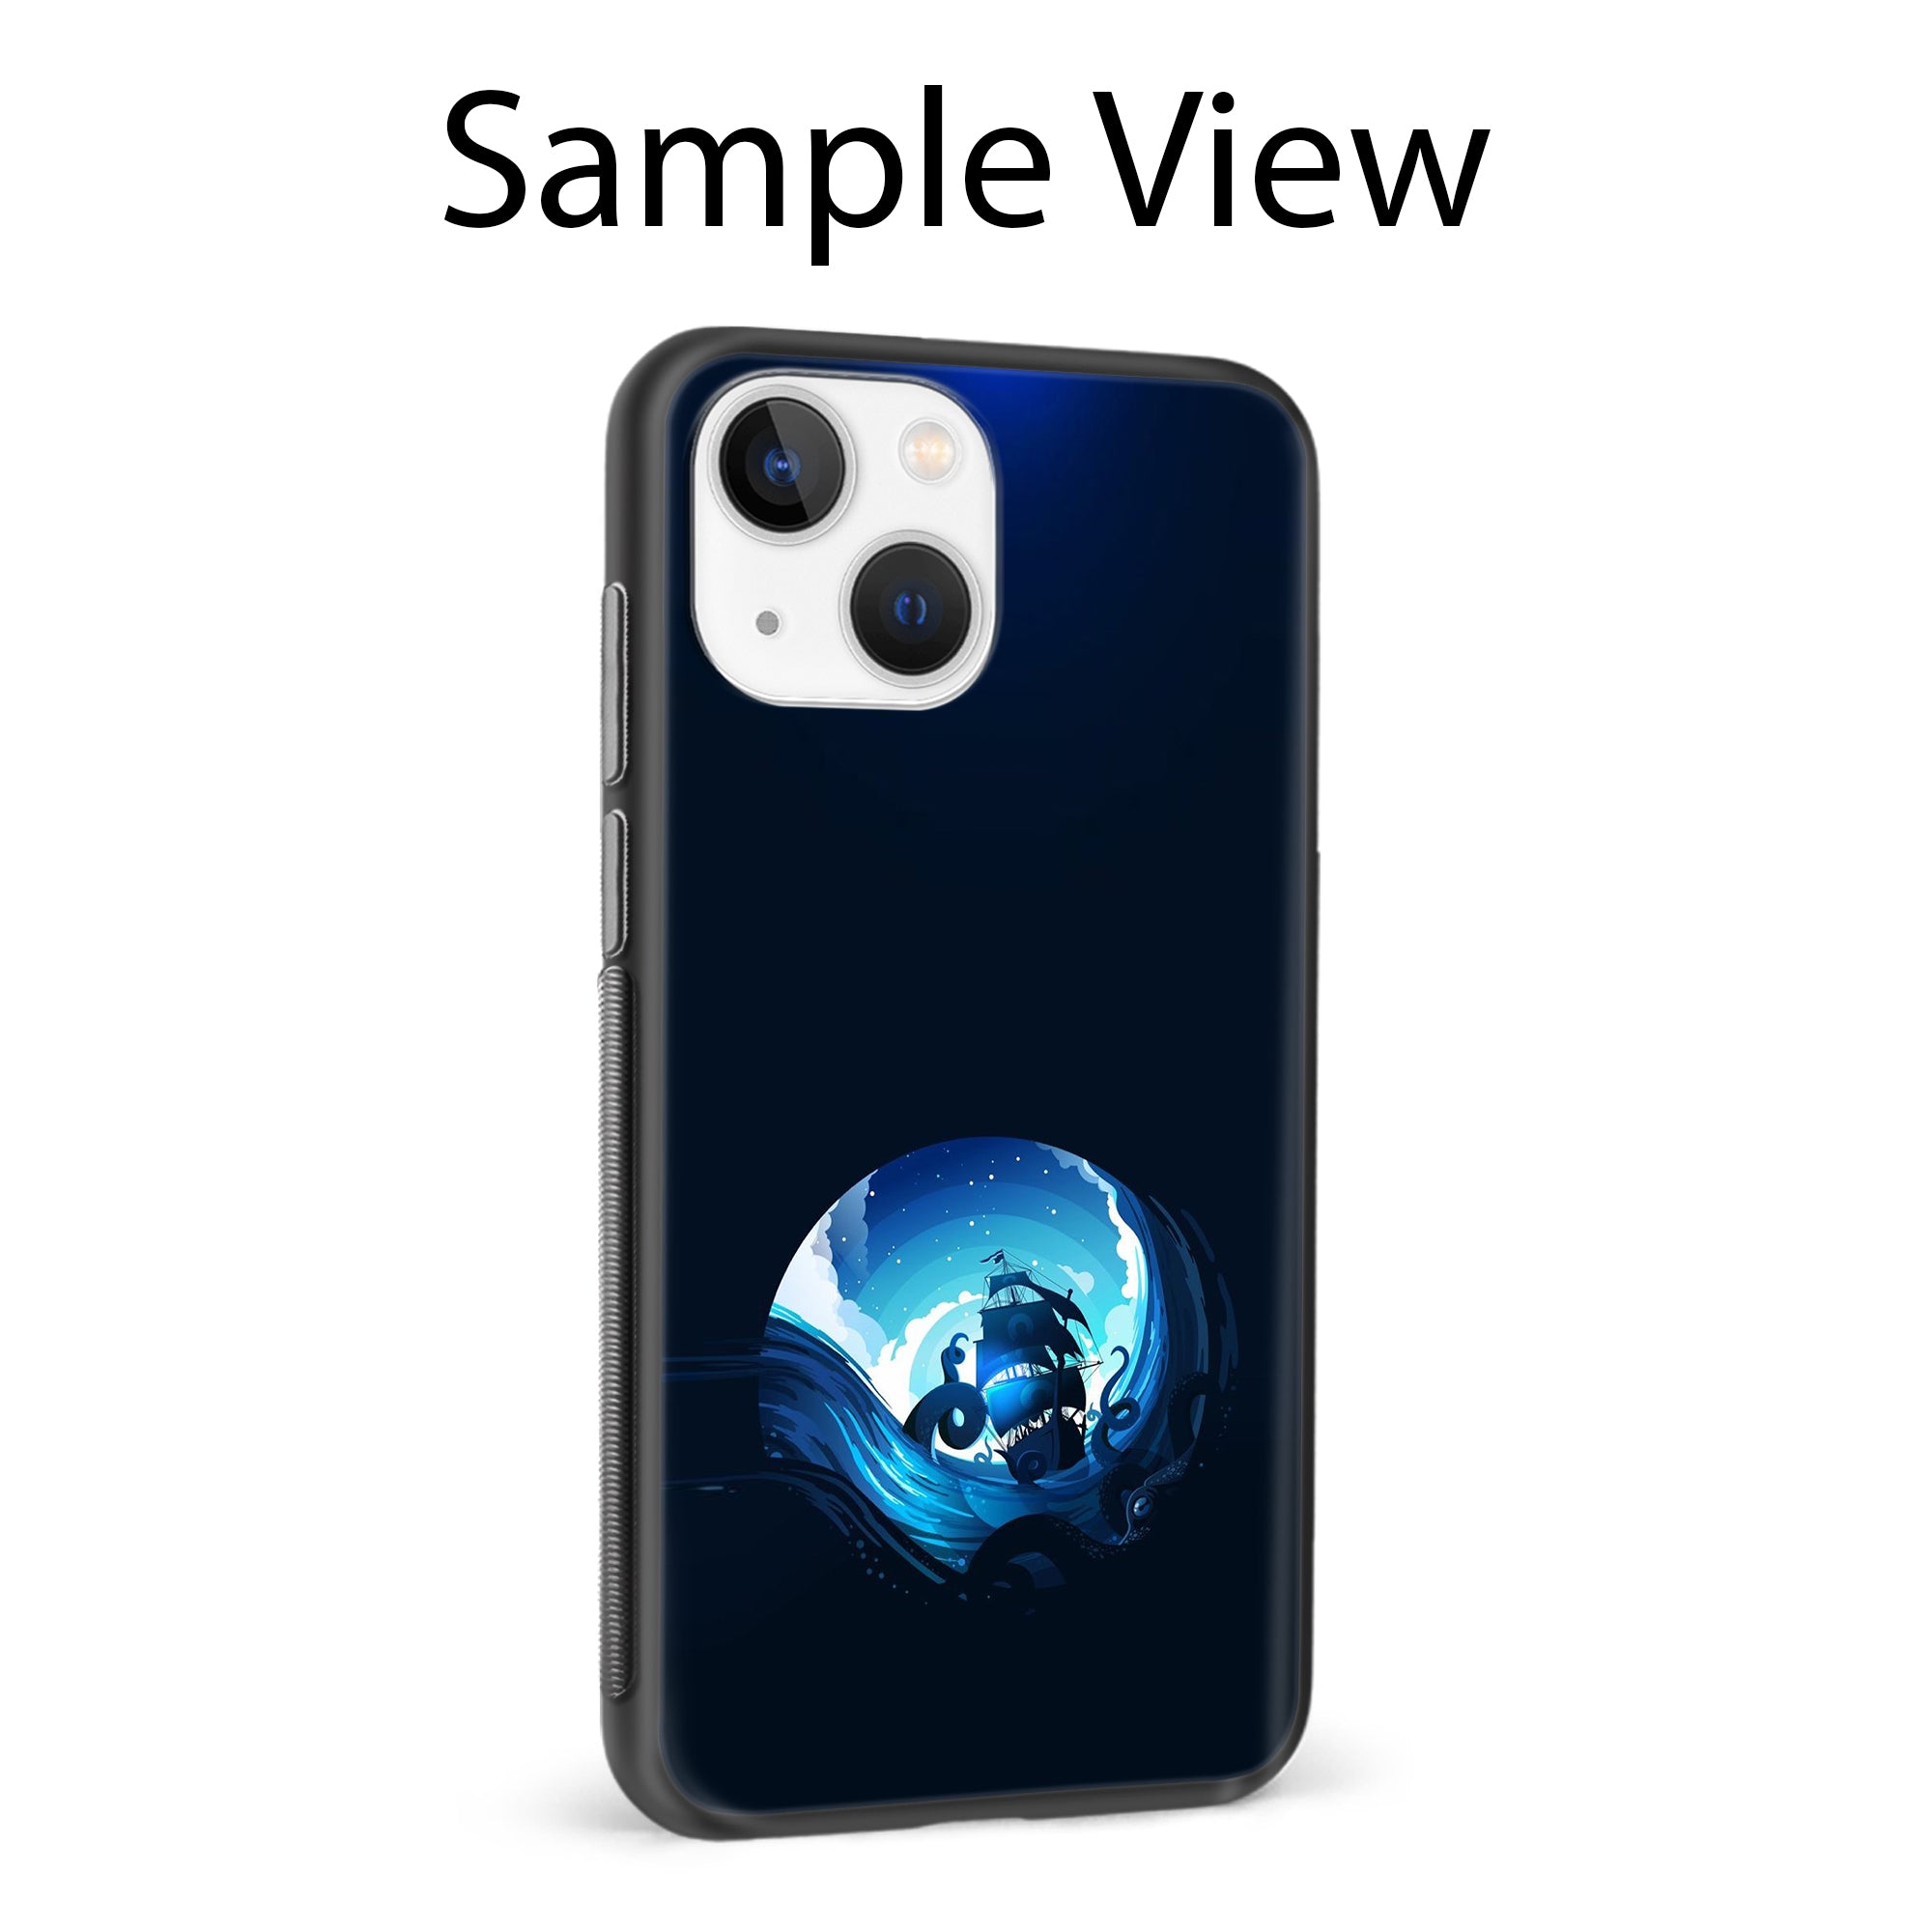 Buy Blue Seaship Glass/Metal Back Mobile Phone Case/Cover For iPhone 11 Pro Online